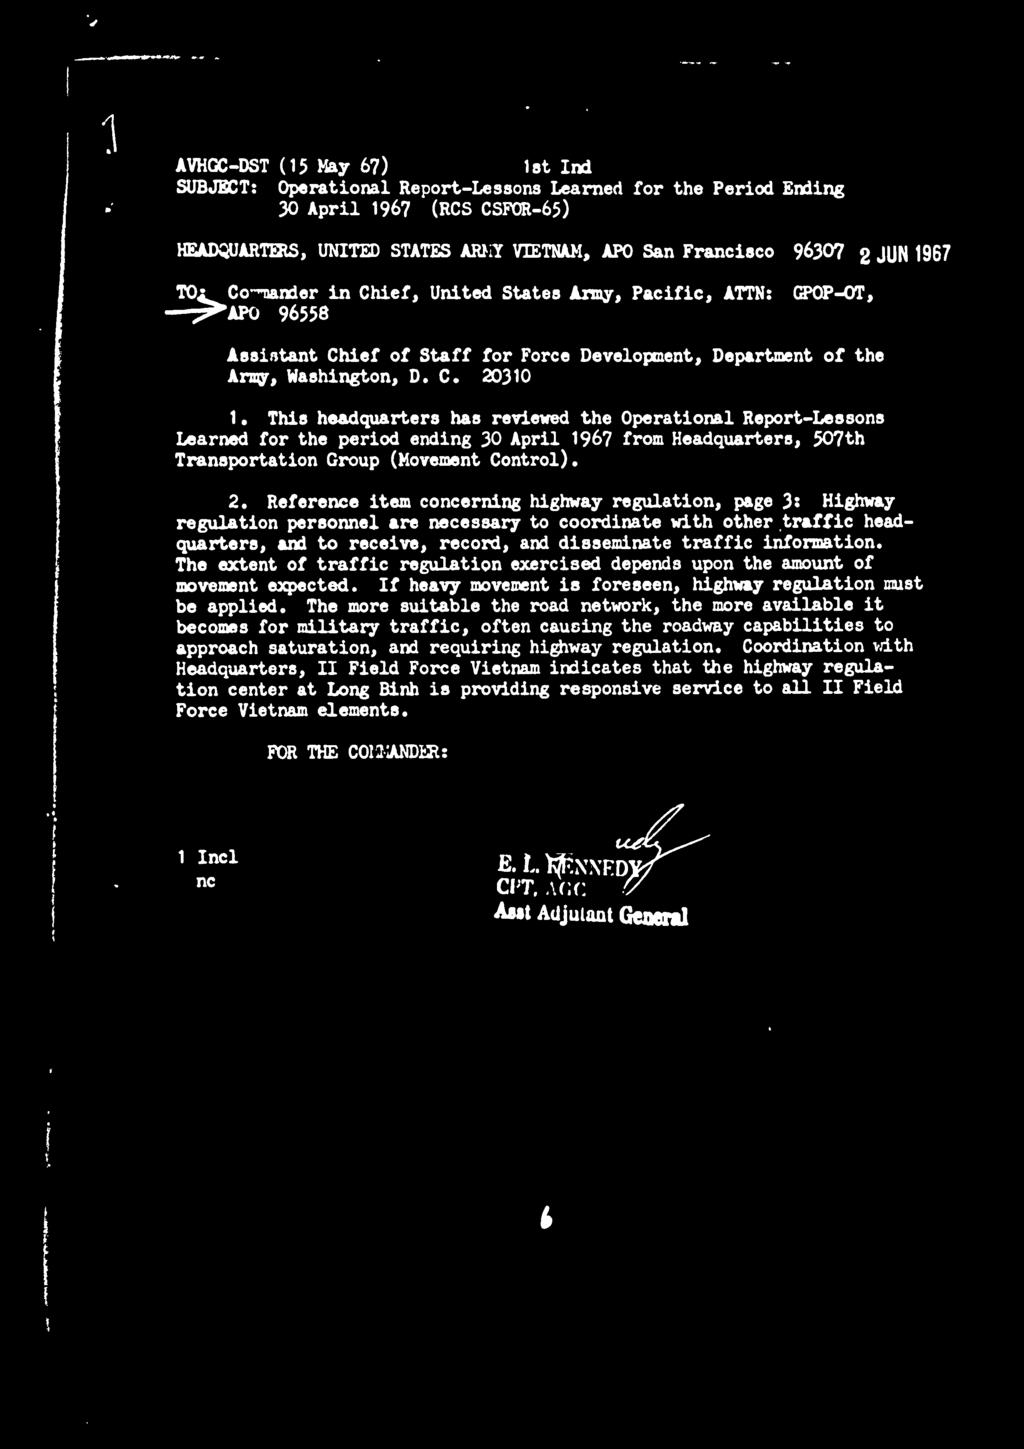 This headquarters has reviewed the Operational Report-Lessons Learned for the period ending 30 April 1967 from Headquarters, 507th Transportation Group (Movement Control). 2.